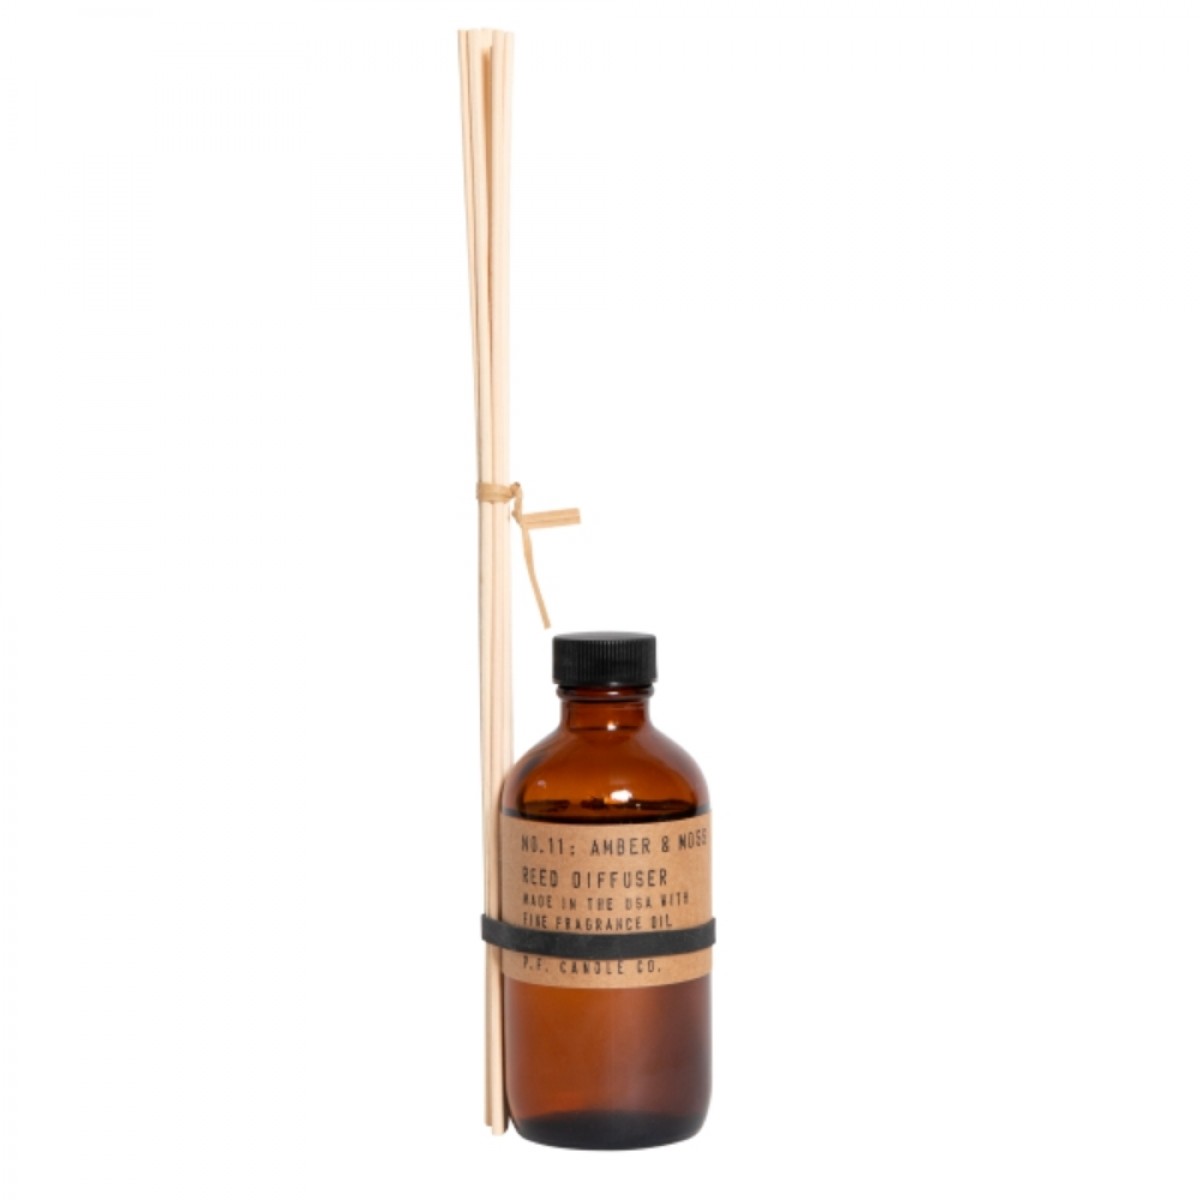 no. 11 amber and moss diffuser - look